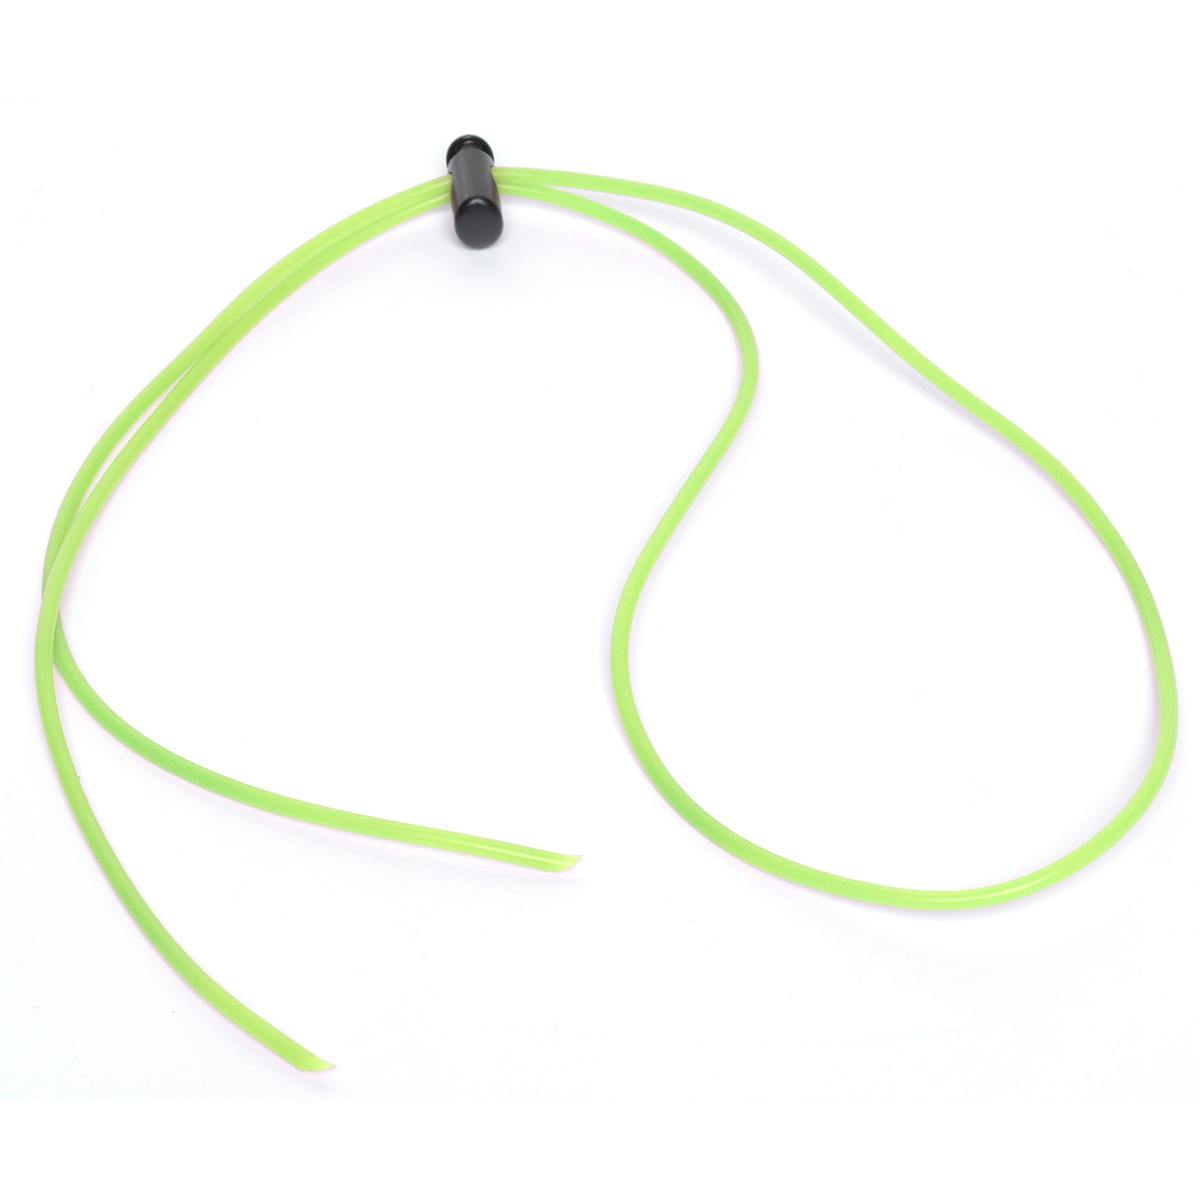 Speedo Universal Replacement Goggle Strap - Green